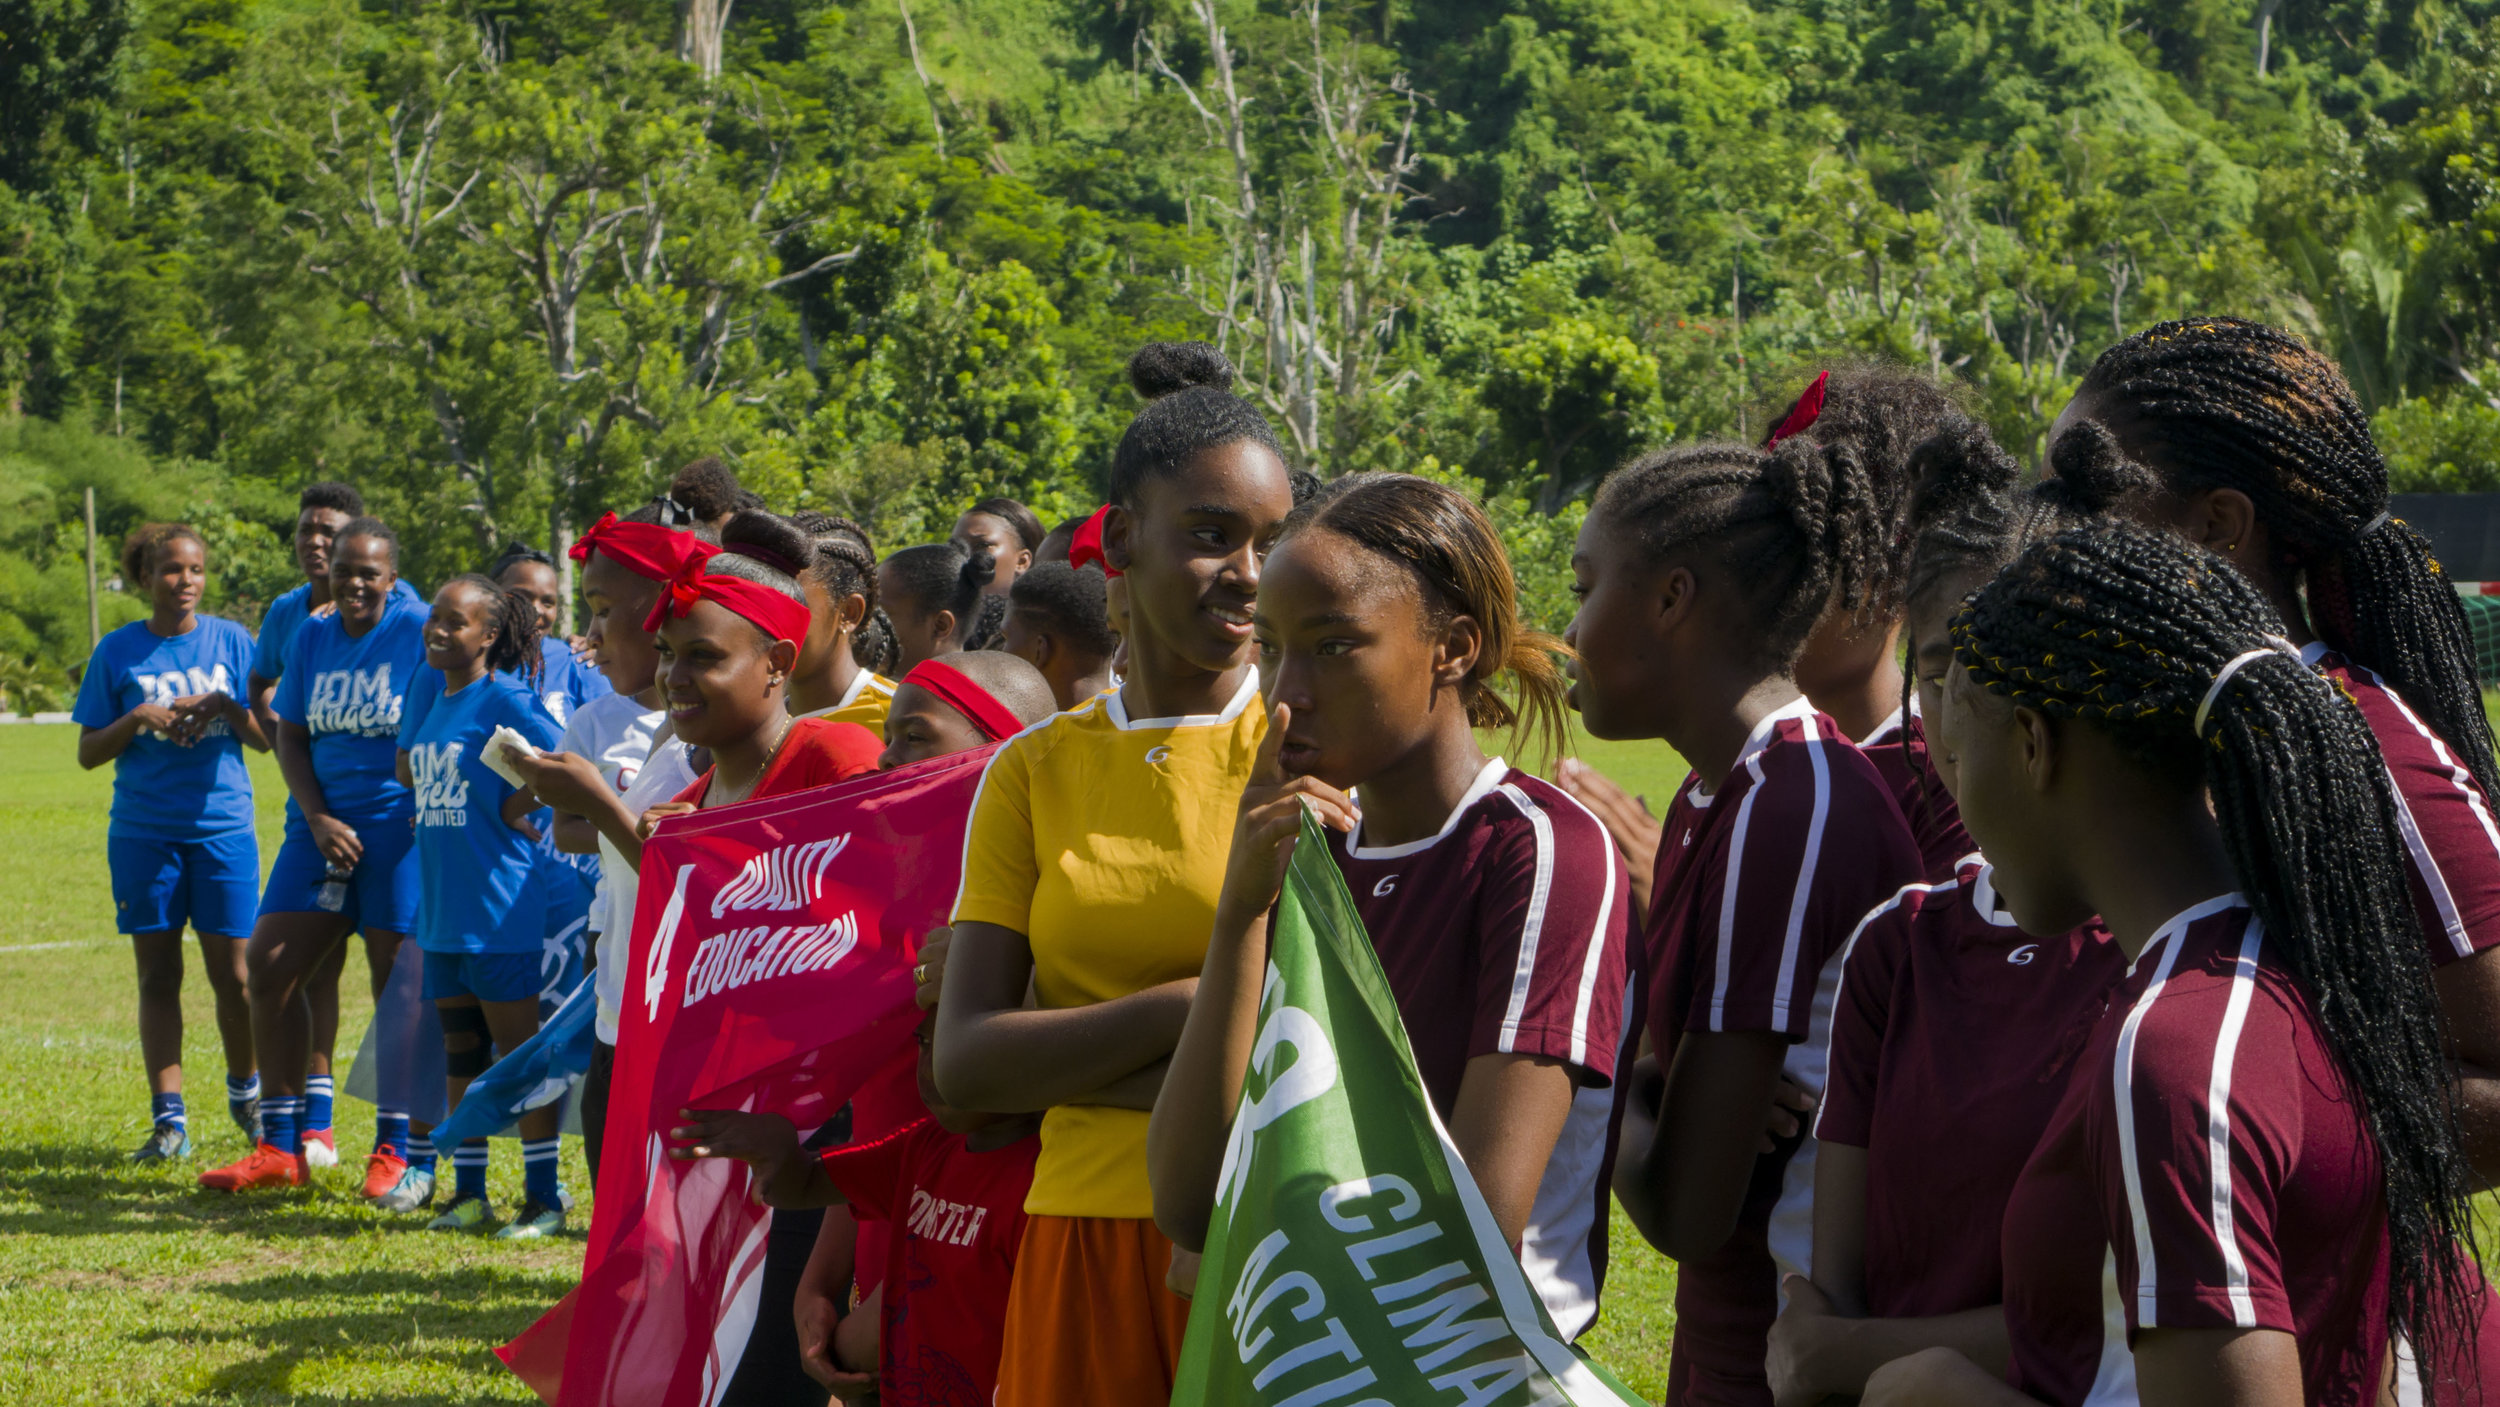   Dominica National Anthem   "We play to protect all families, our environment and future generations from the impact of the climate crisis!" - Team captain from Climate Reality and organizer, Sapphire Sky Carrington.&nbsp; 